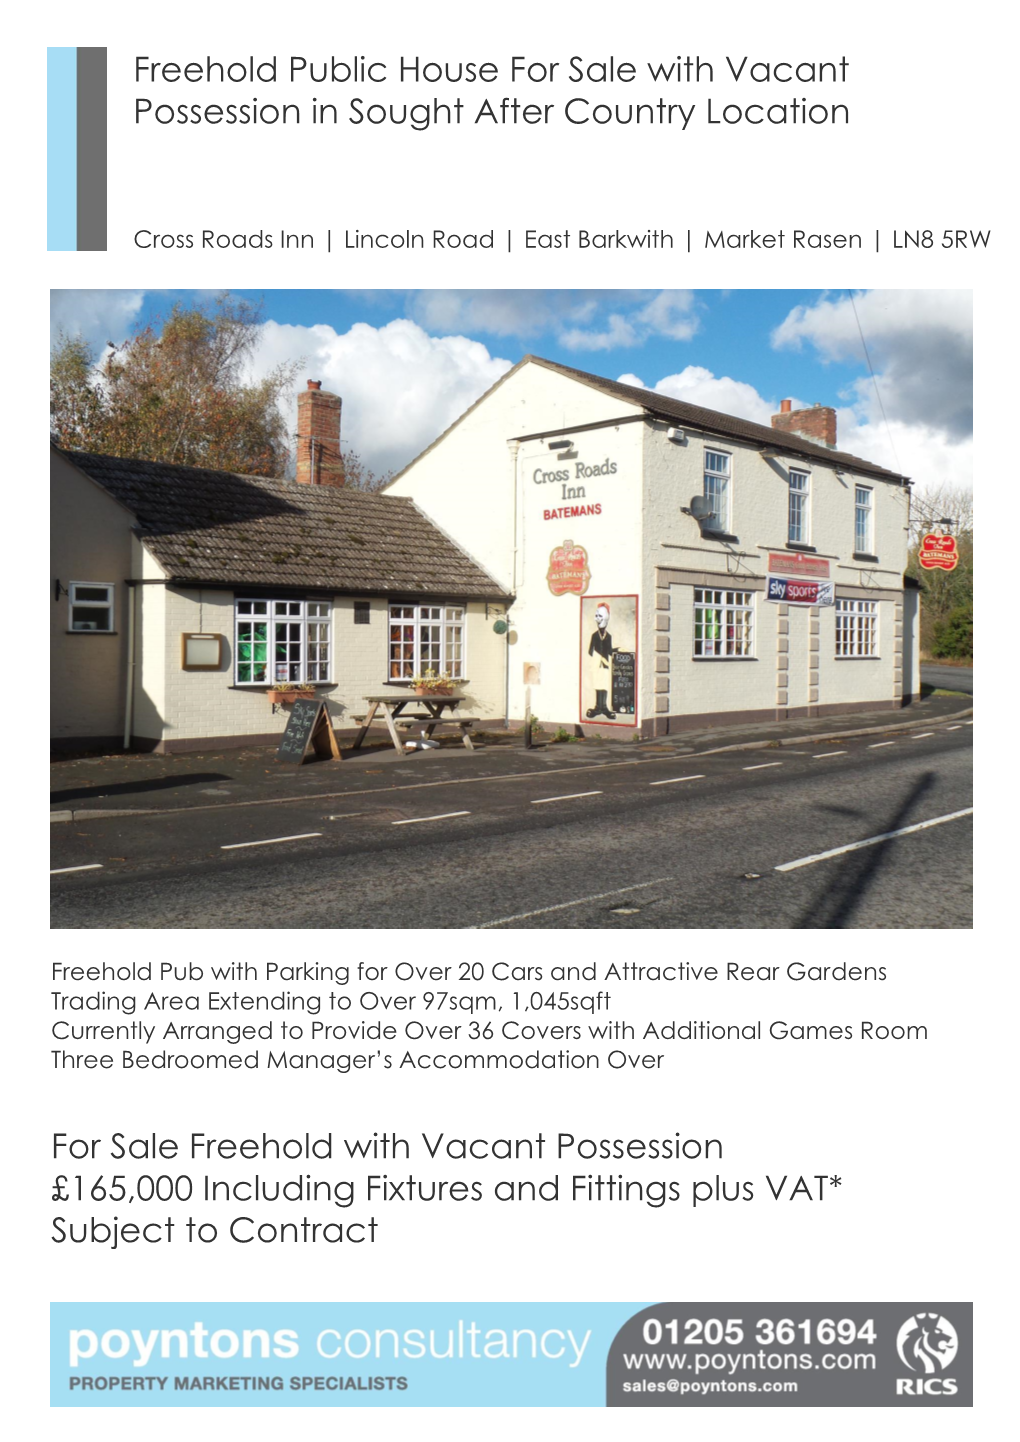 Freehold Public House for Sale with Vacant Possession in Sought After Country Location